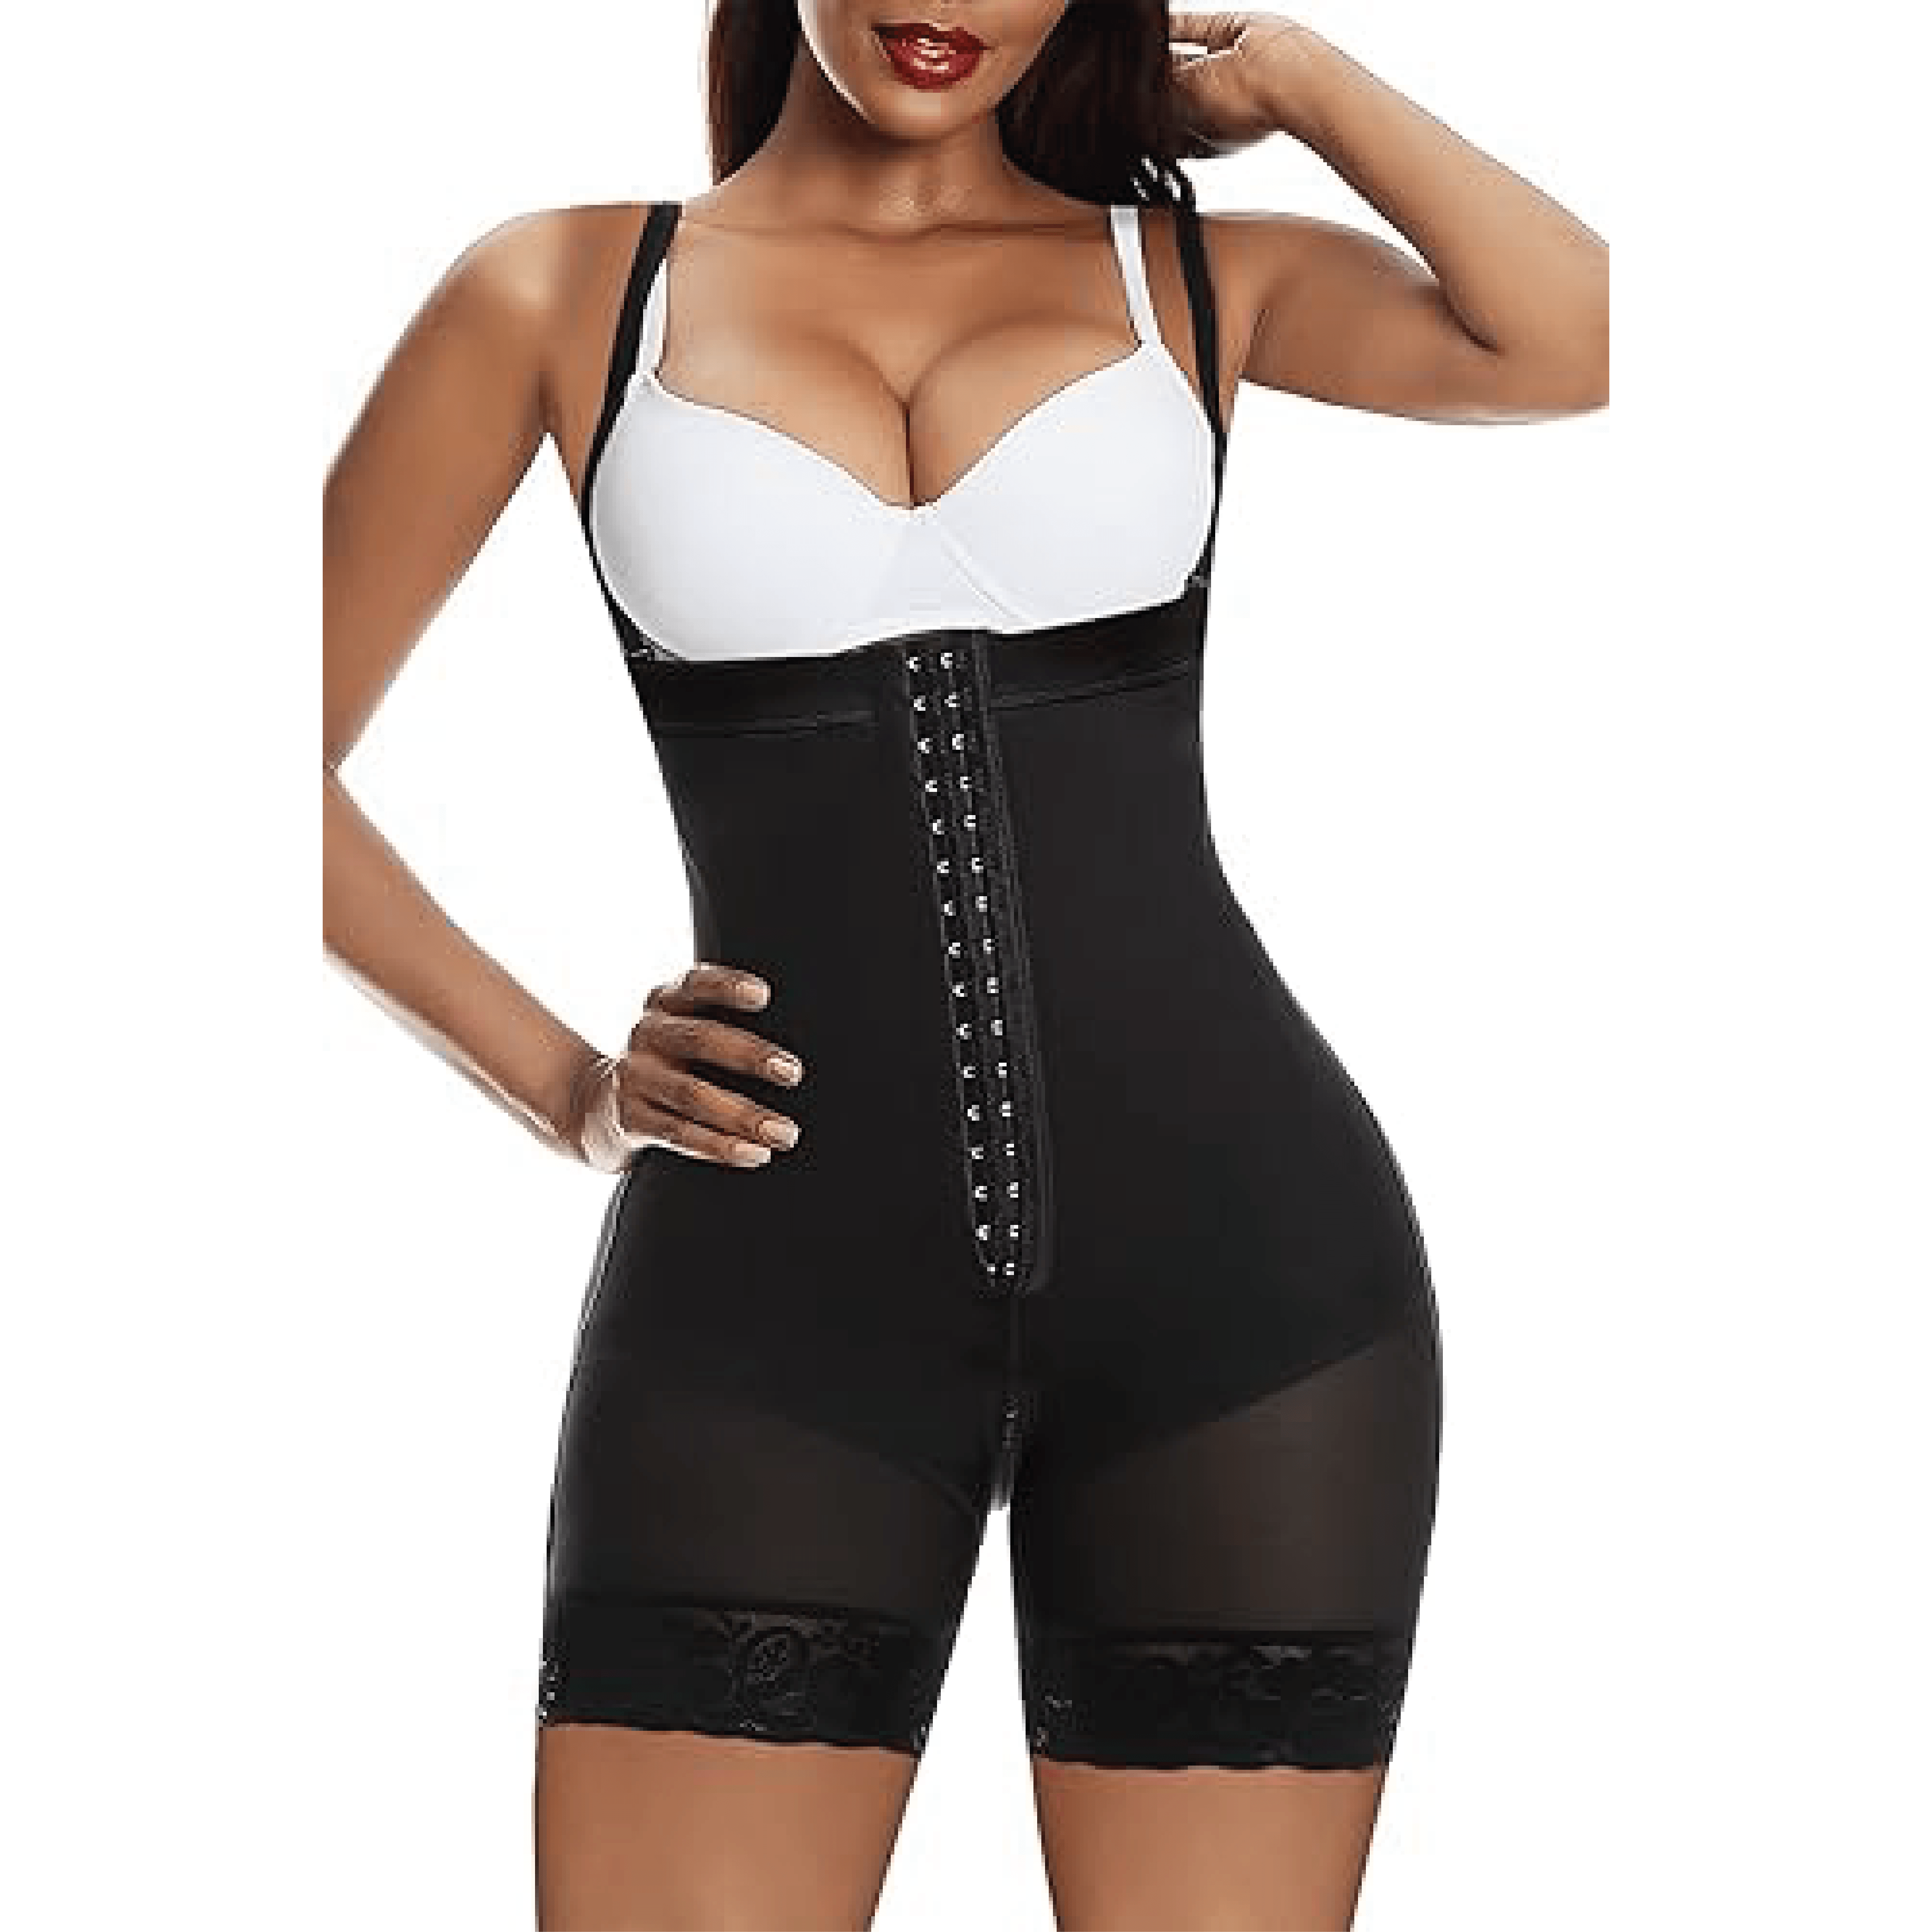 Step into confidence with YIANNA Fajas Colombianas High Compression Shapewear for Women